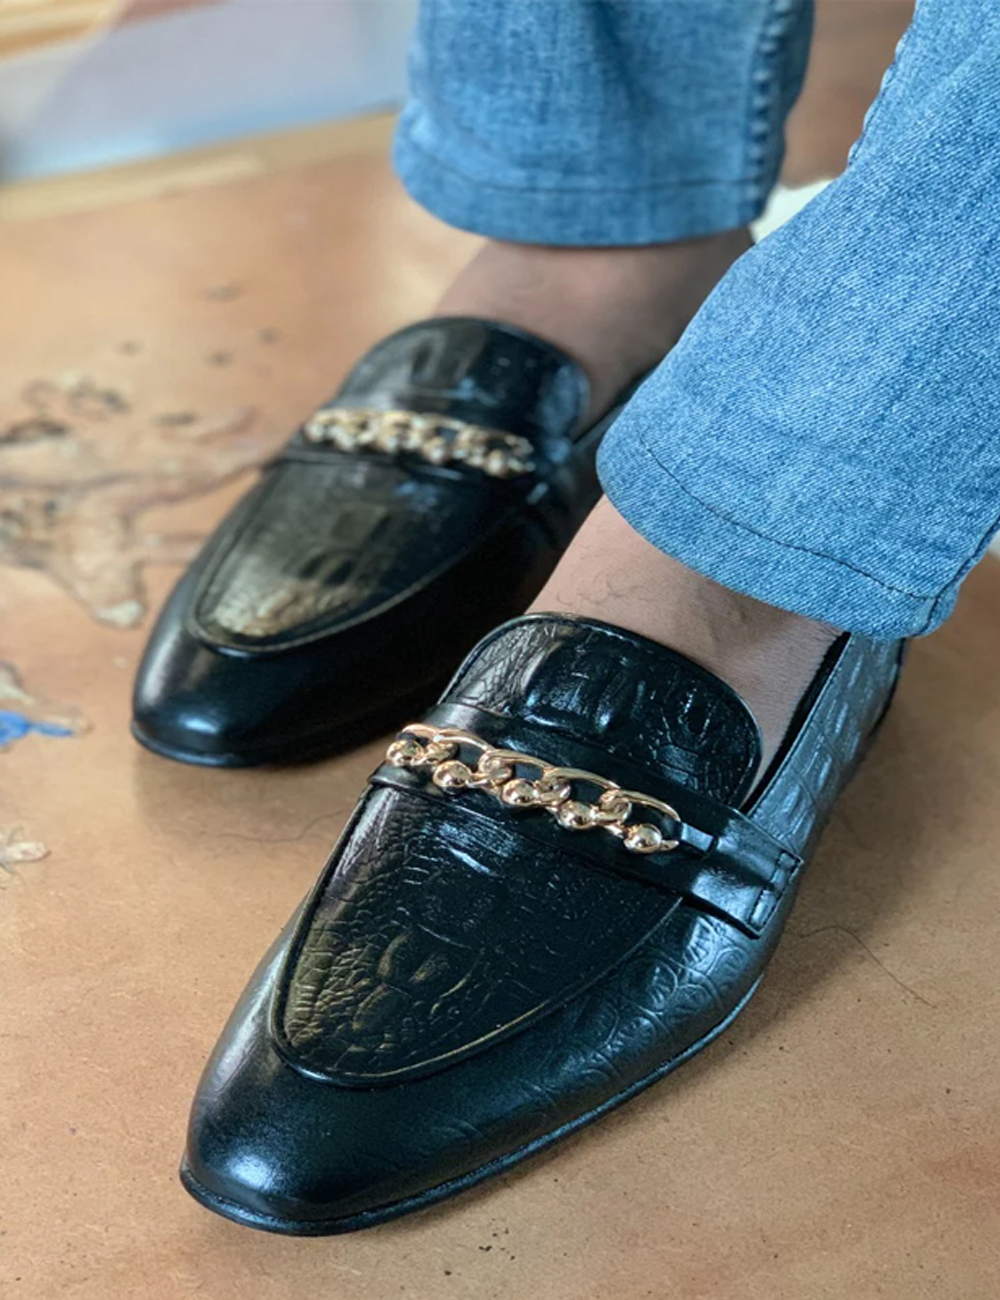 Formal Leather Moccasin Shoes